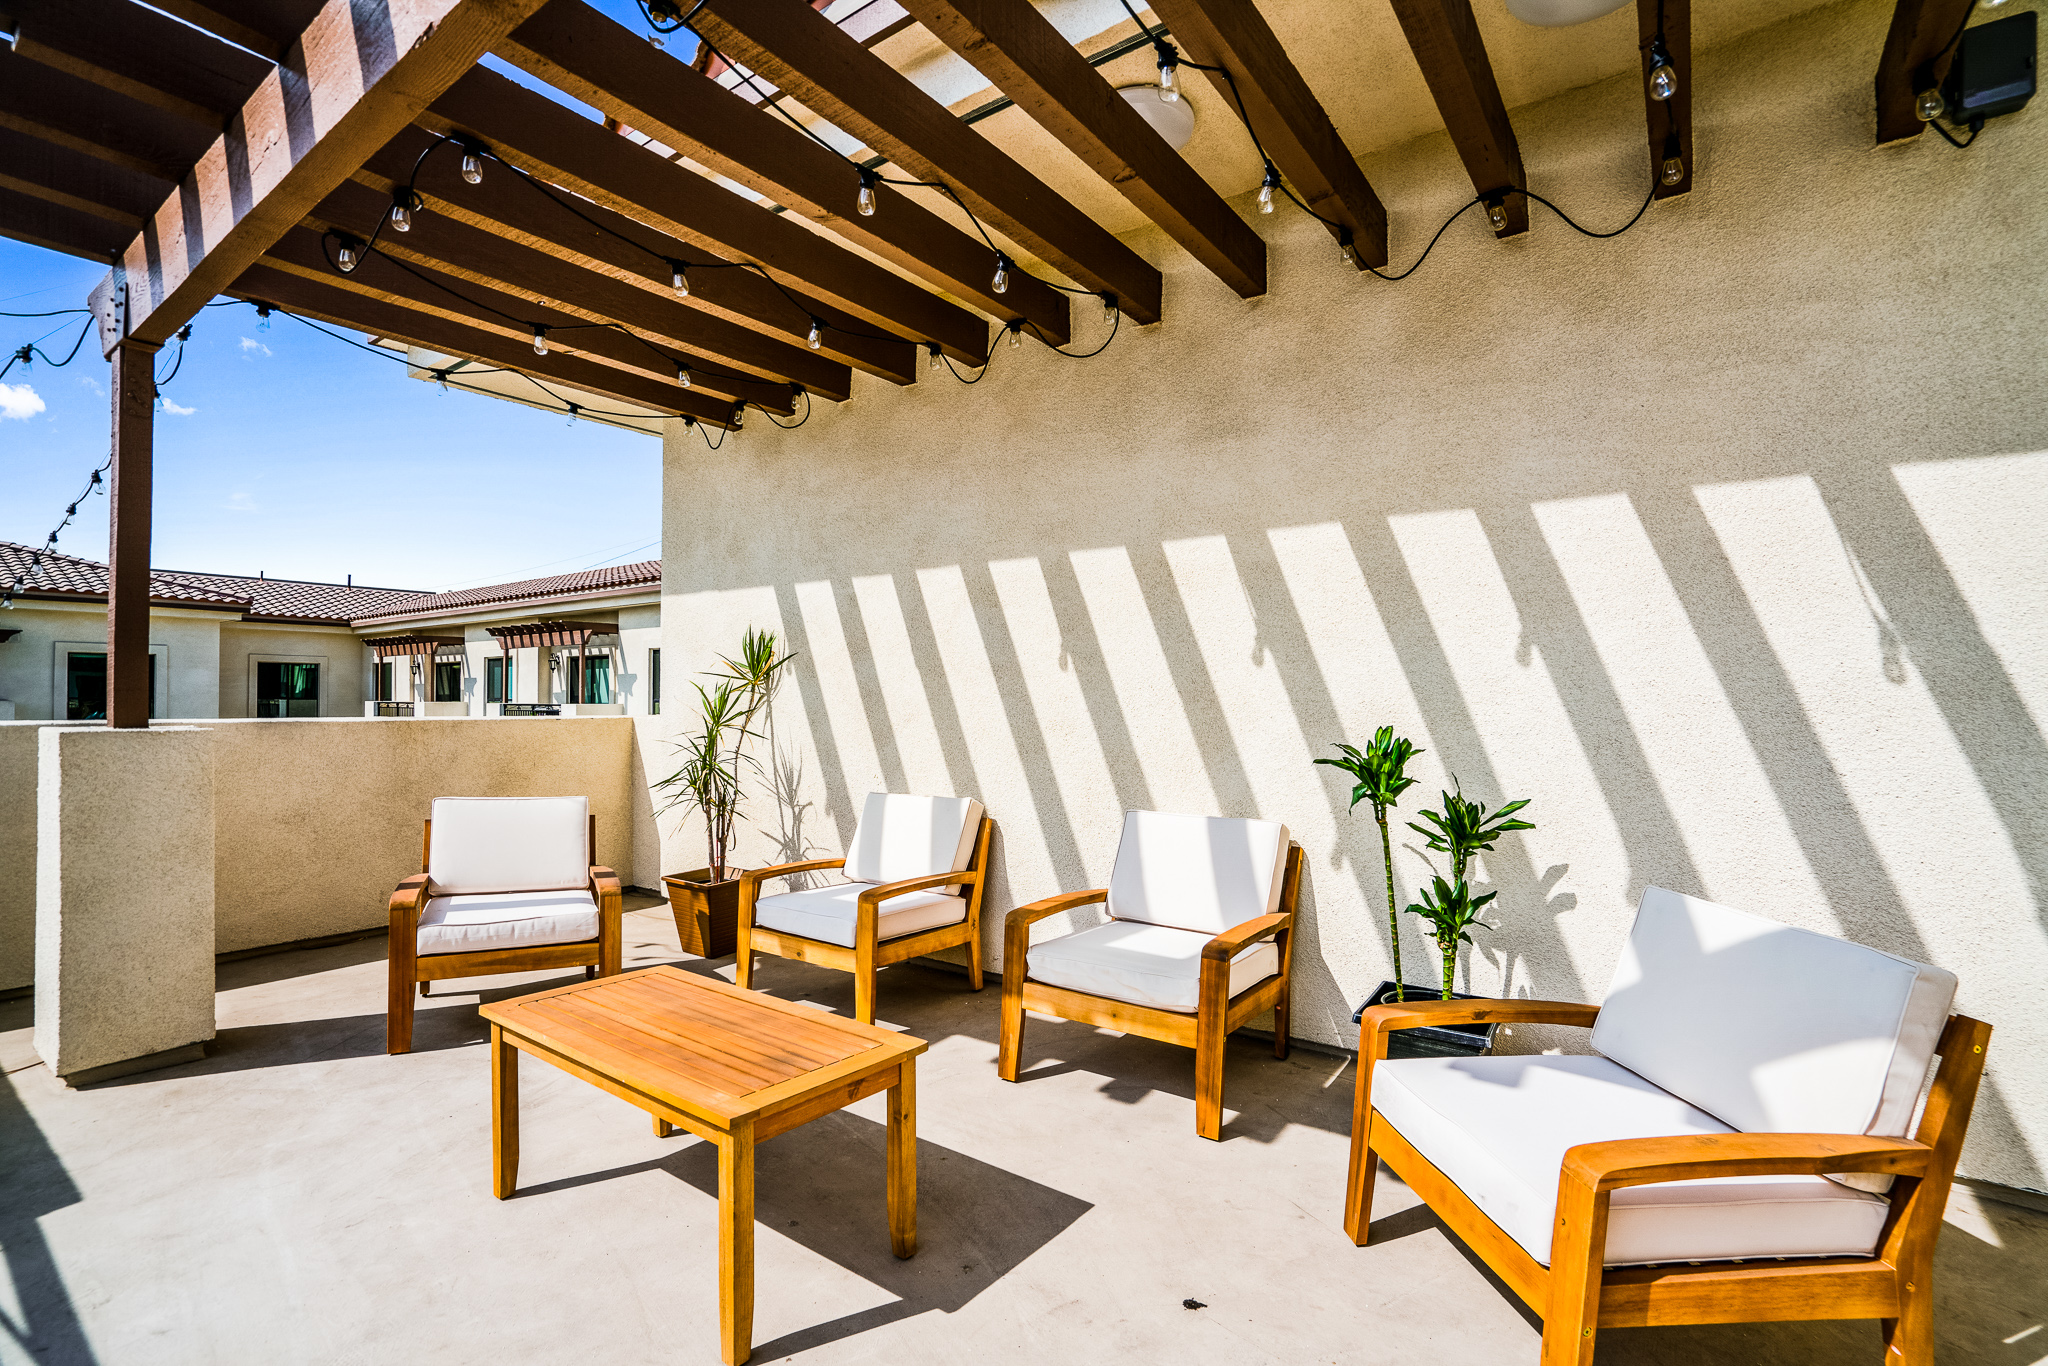 Cushion-covered wood furniture with plants on the elevated community patio at Gladstone Senior Villas.